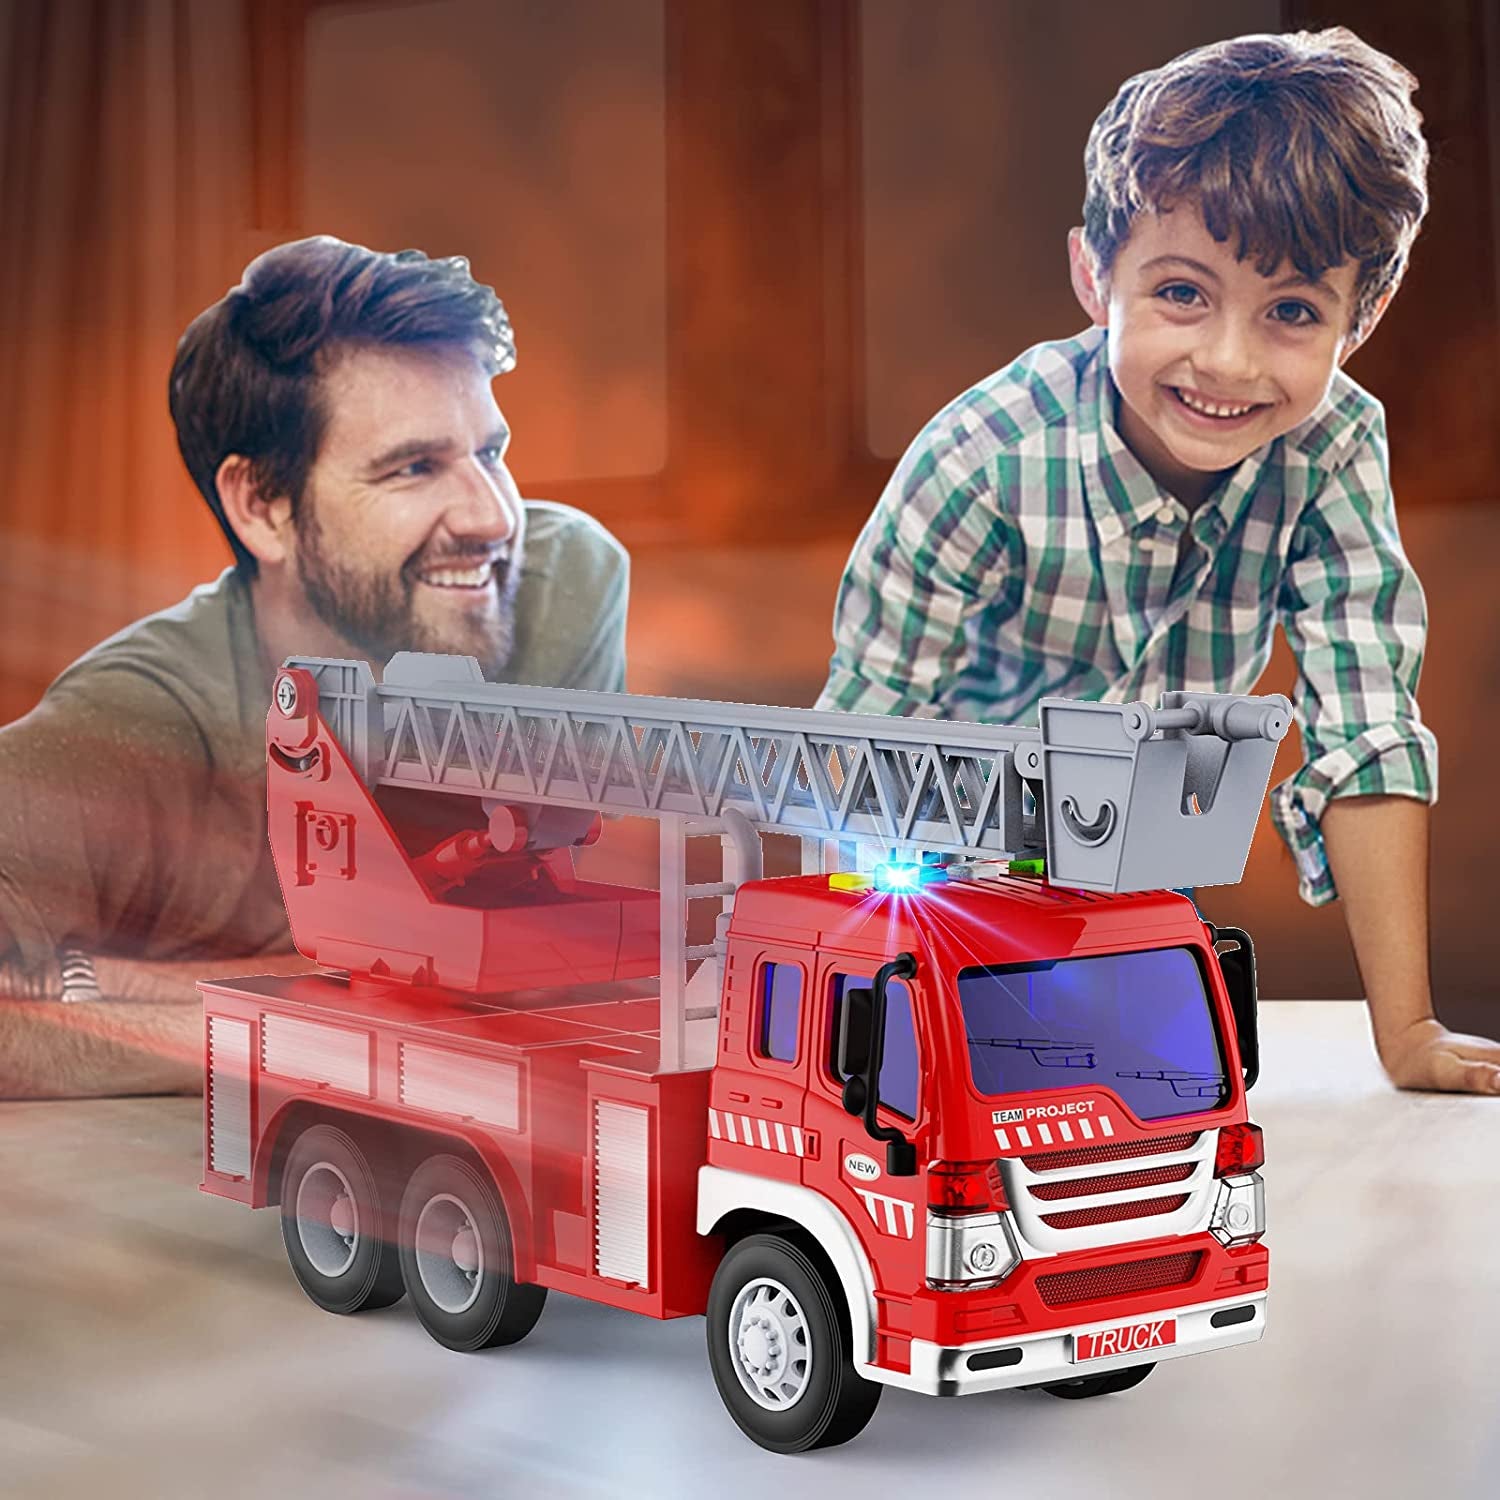 Fire Truck Toy, TOYABI Fire Truck Toys for 3 Year Old Boys, Toy Fire Truck for inside Play with Lights, Sirens Sounds and Extendable Resce Rotating Ladder, 12-Inch Fire Truck Best Gifts Toys for Boys